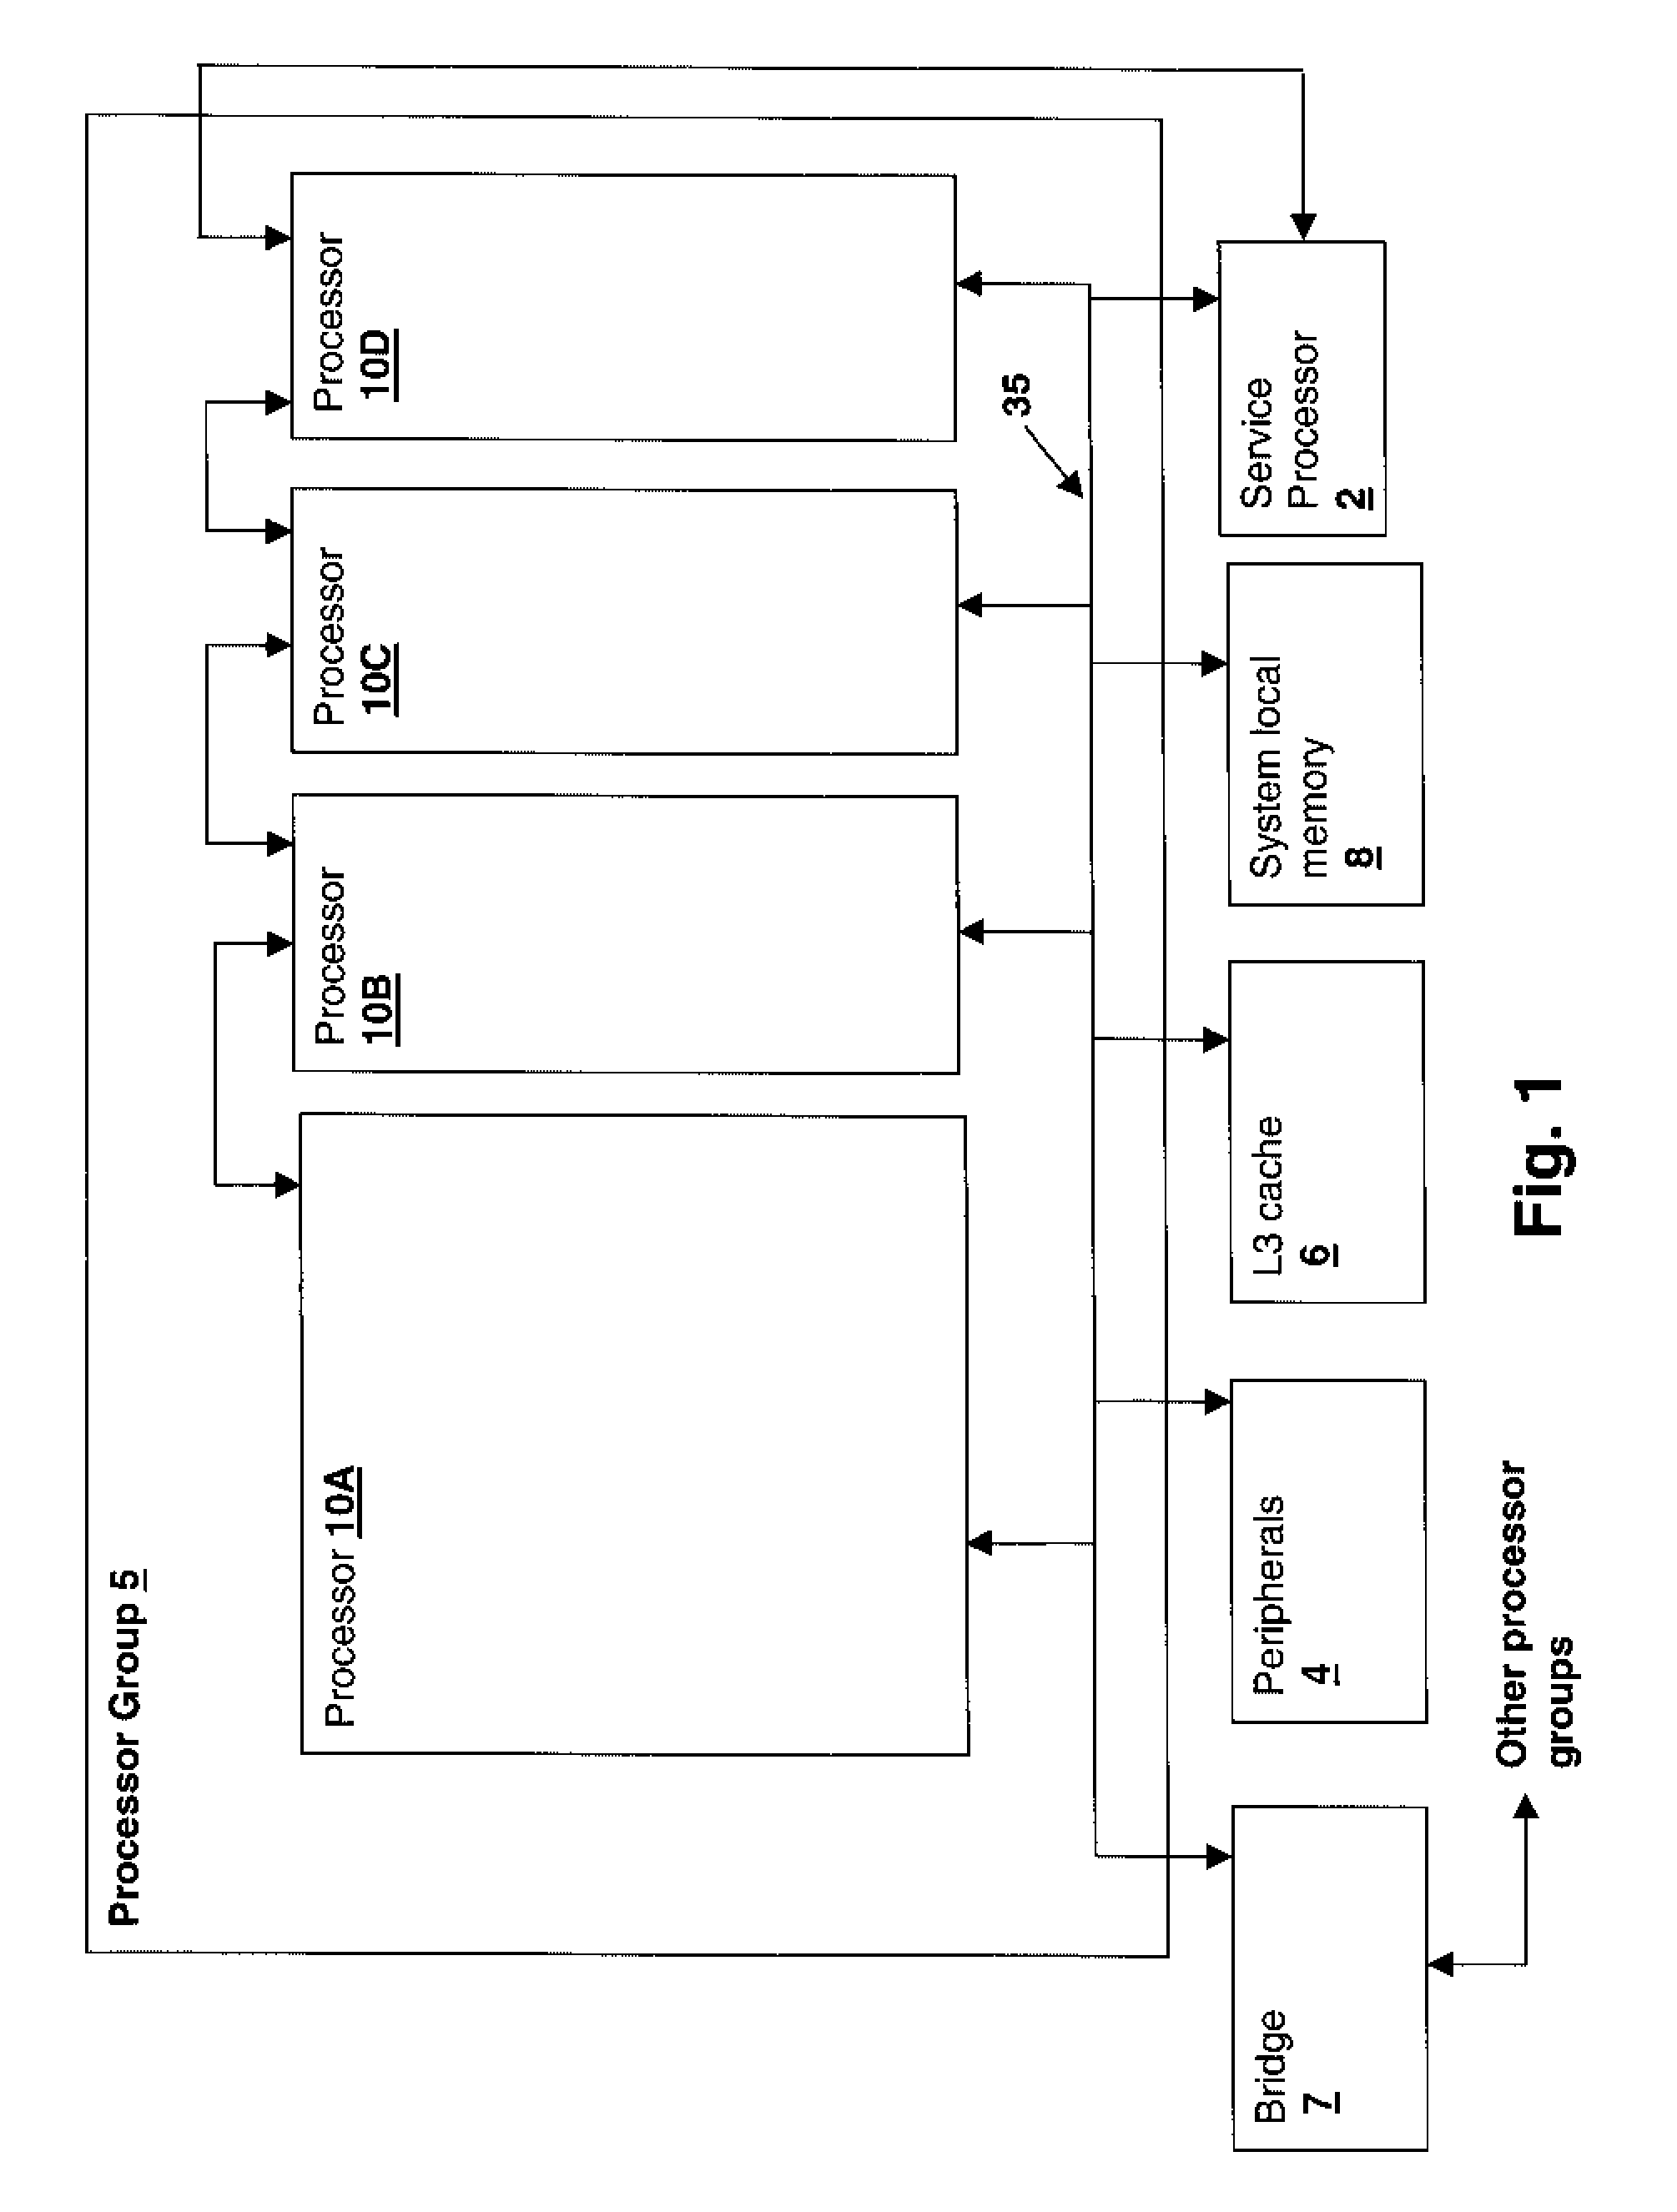 Method and Apparatus for Dynamically Managing Instruction Buffer Depths for Non-Predicted Branches